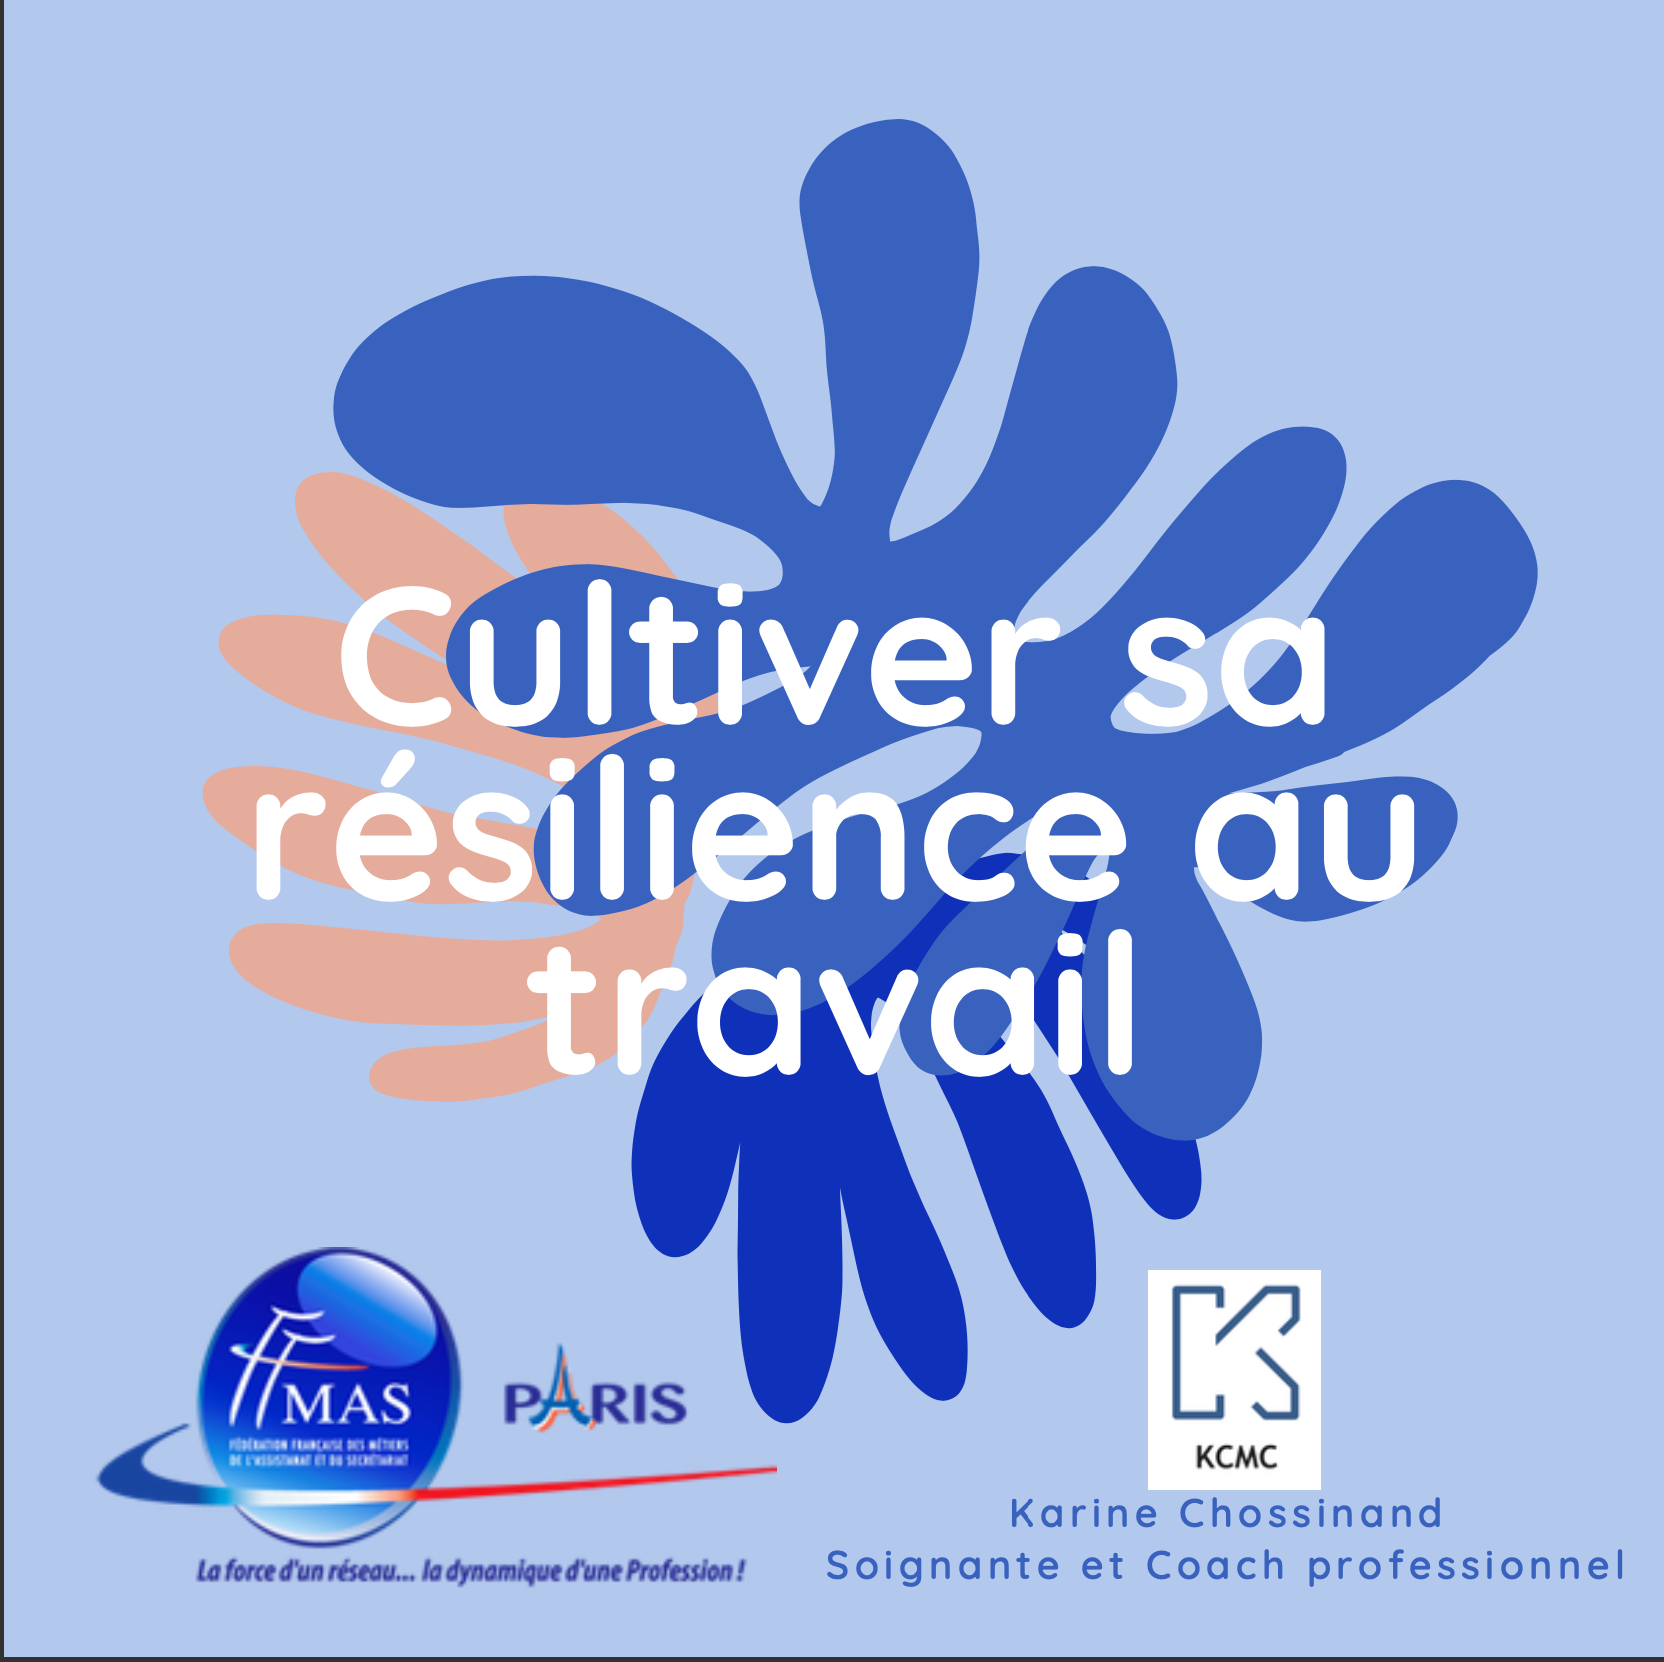 You are currently viewing Cultiver sa résilience au travail le 20/03/2021